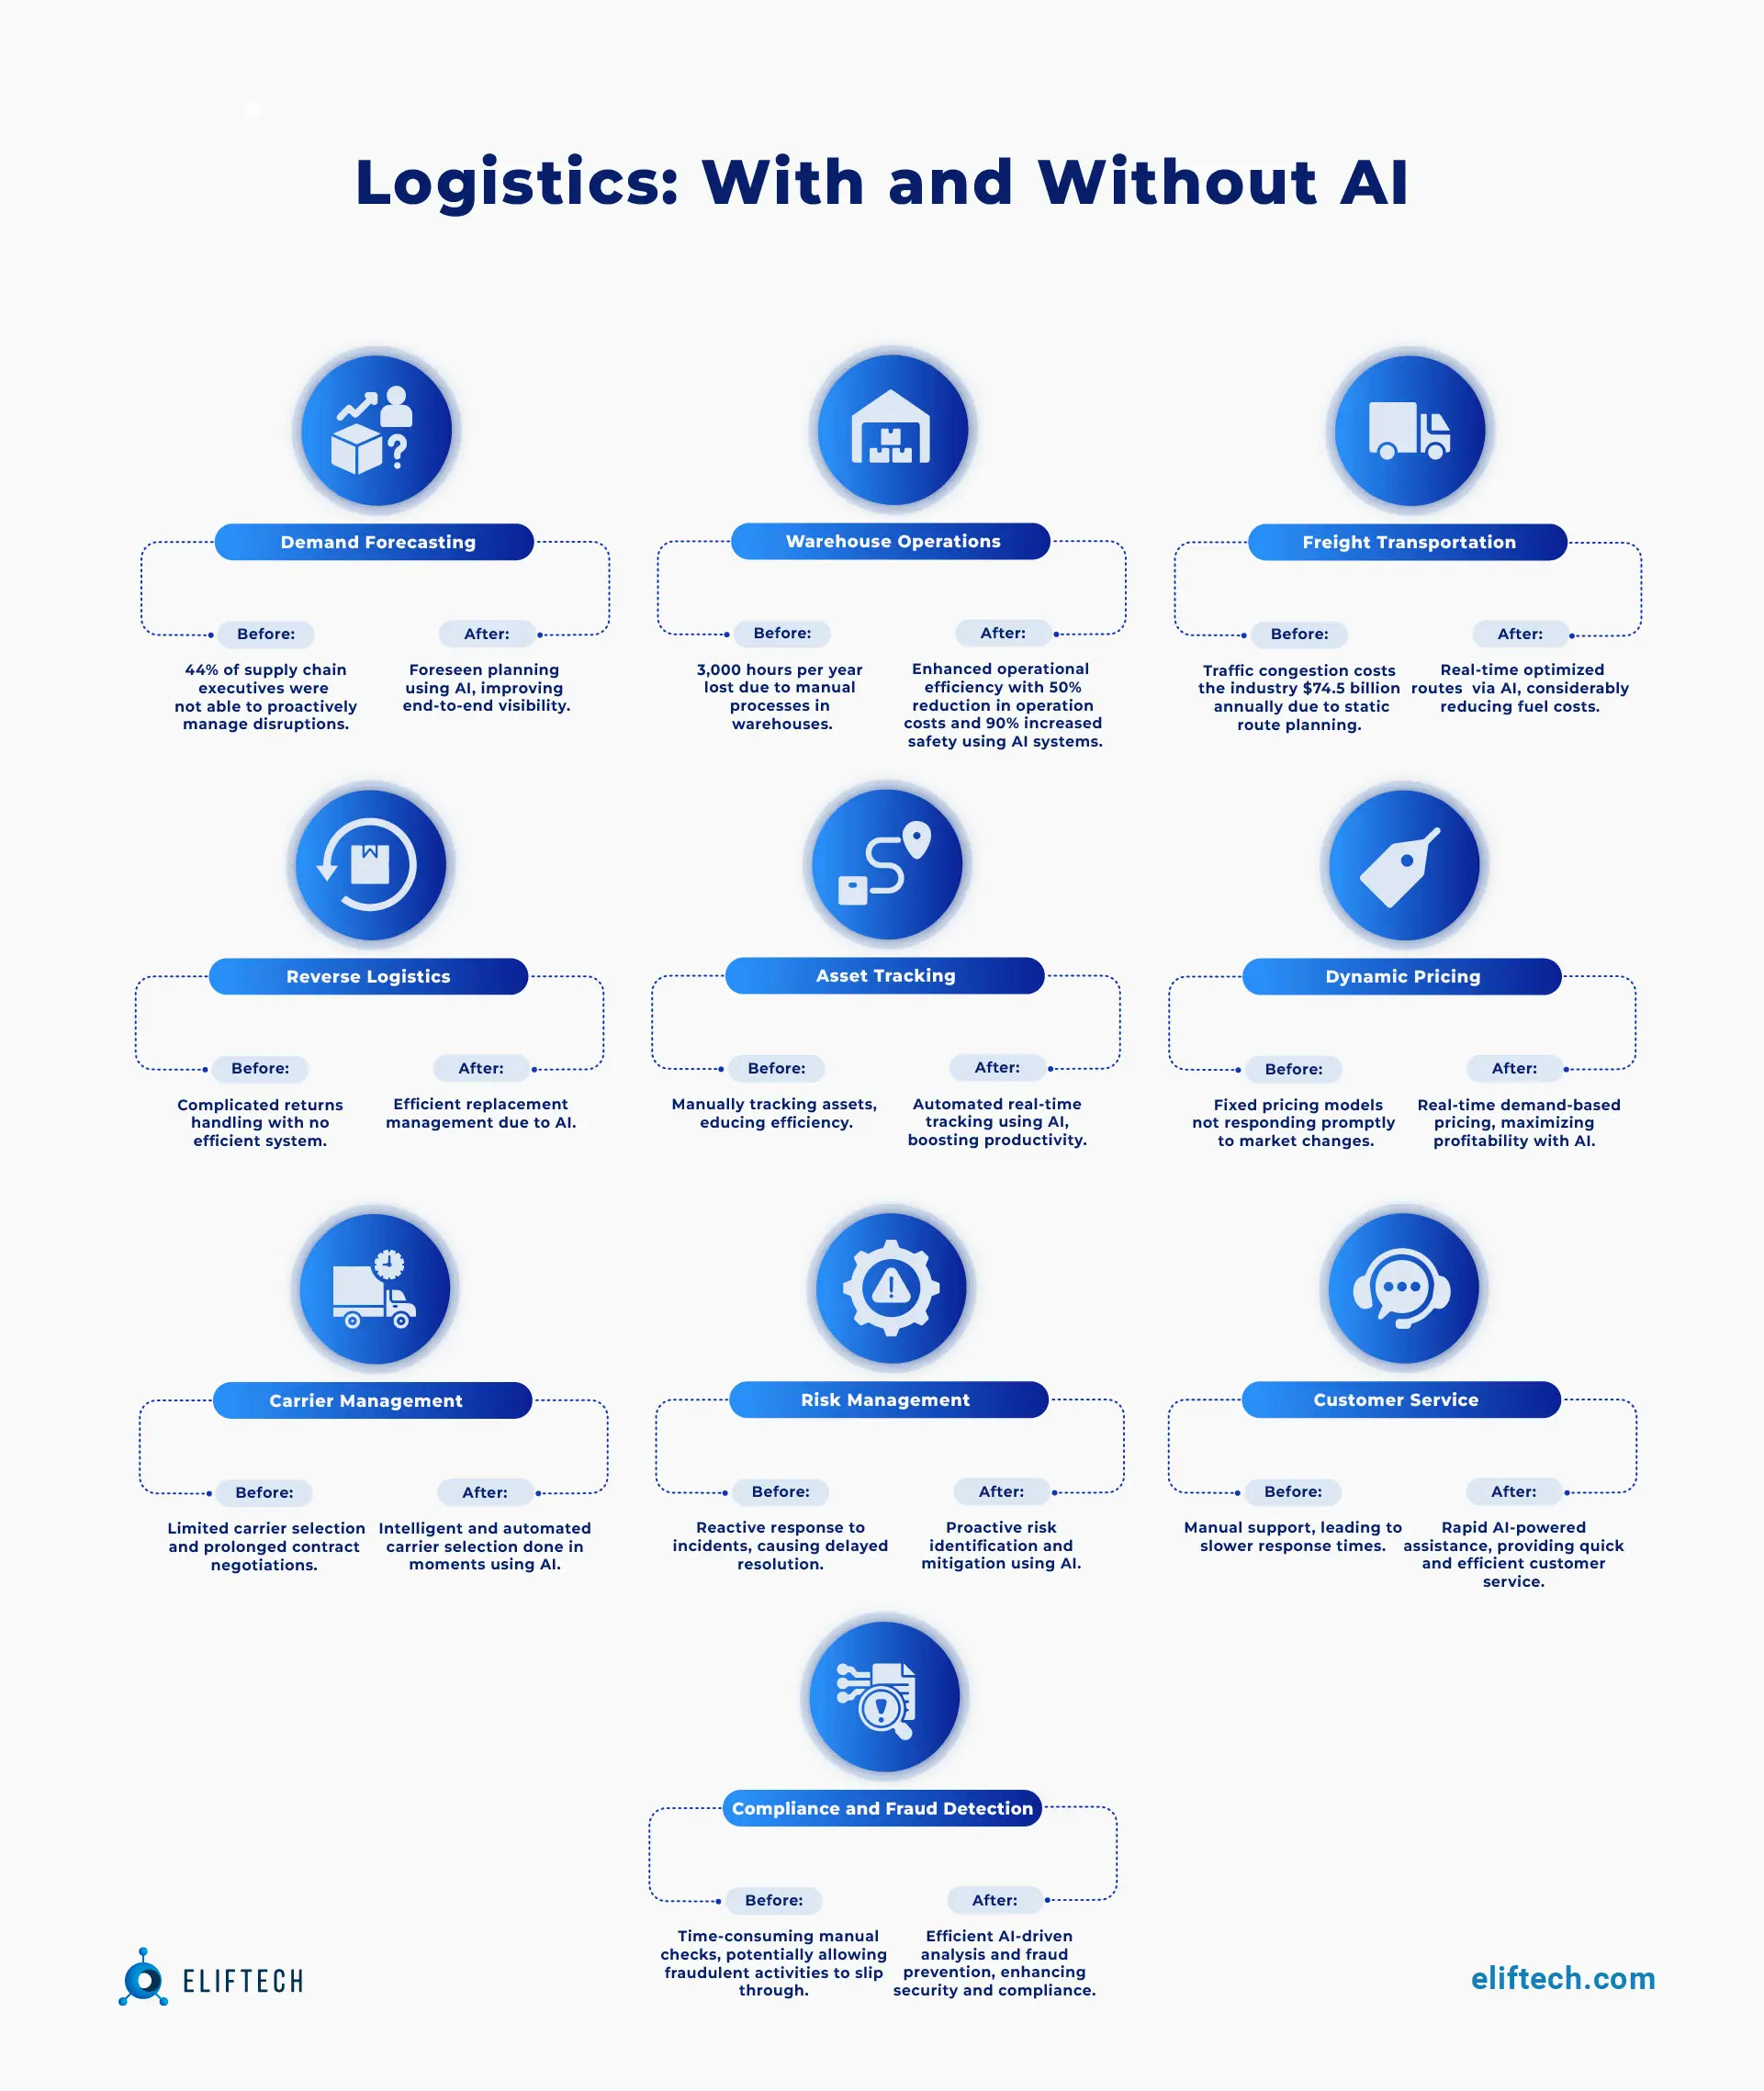 AI in Logistics: How It Impacts the Logistic Industry